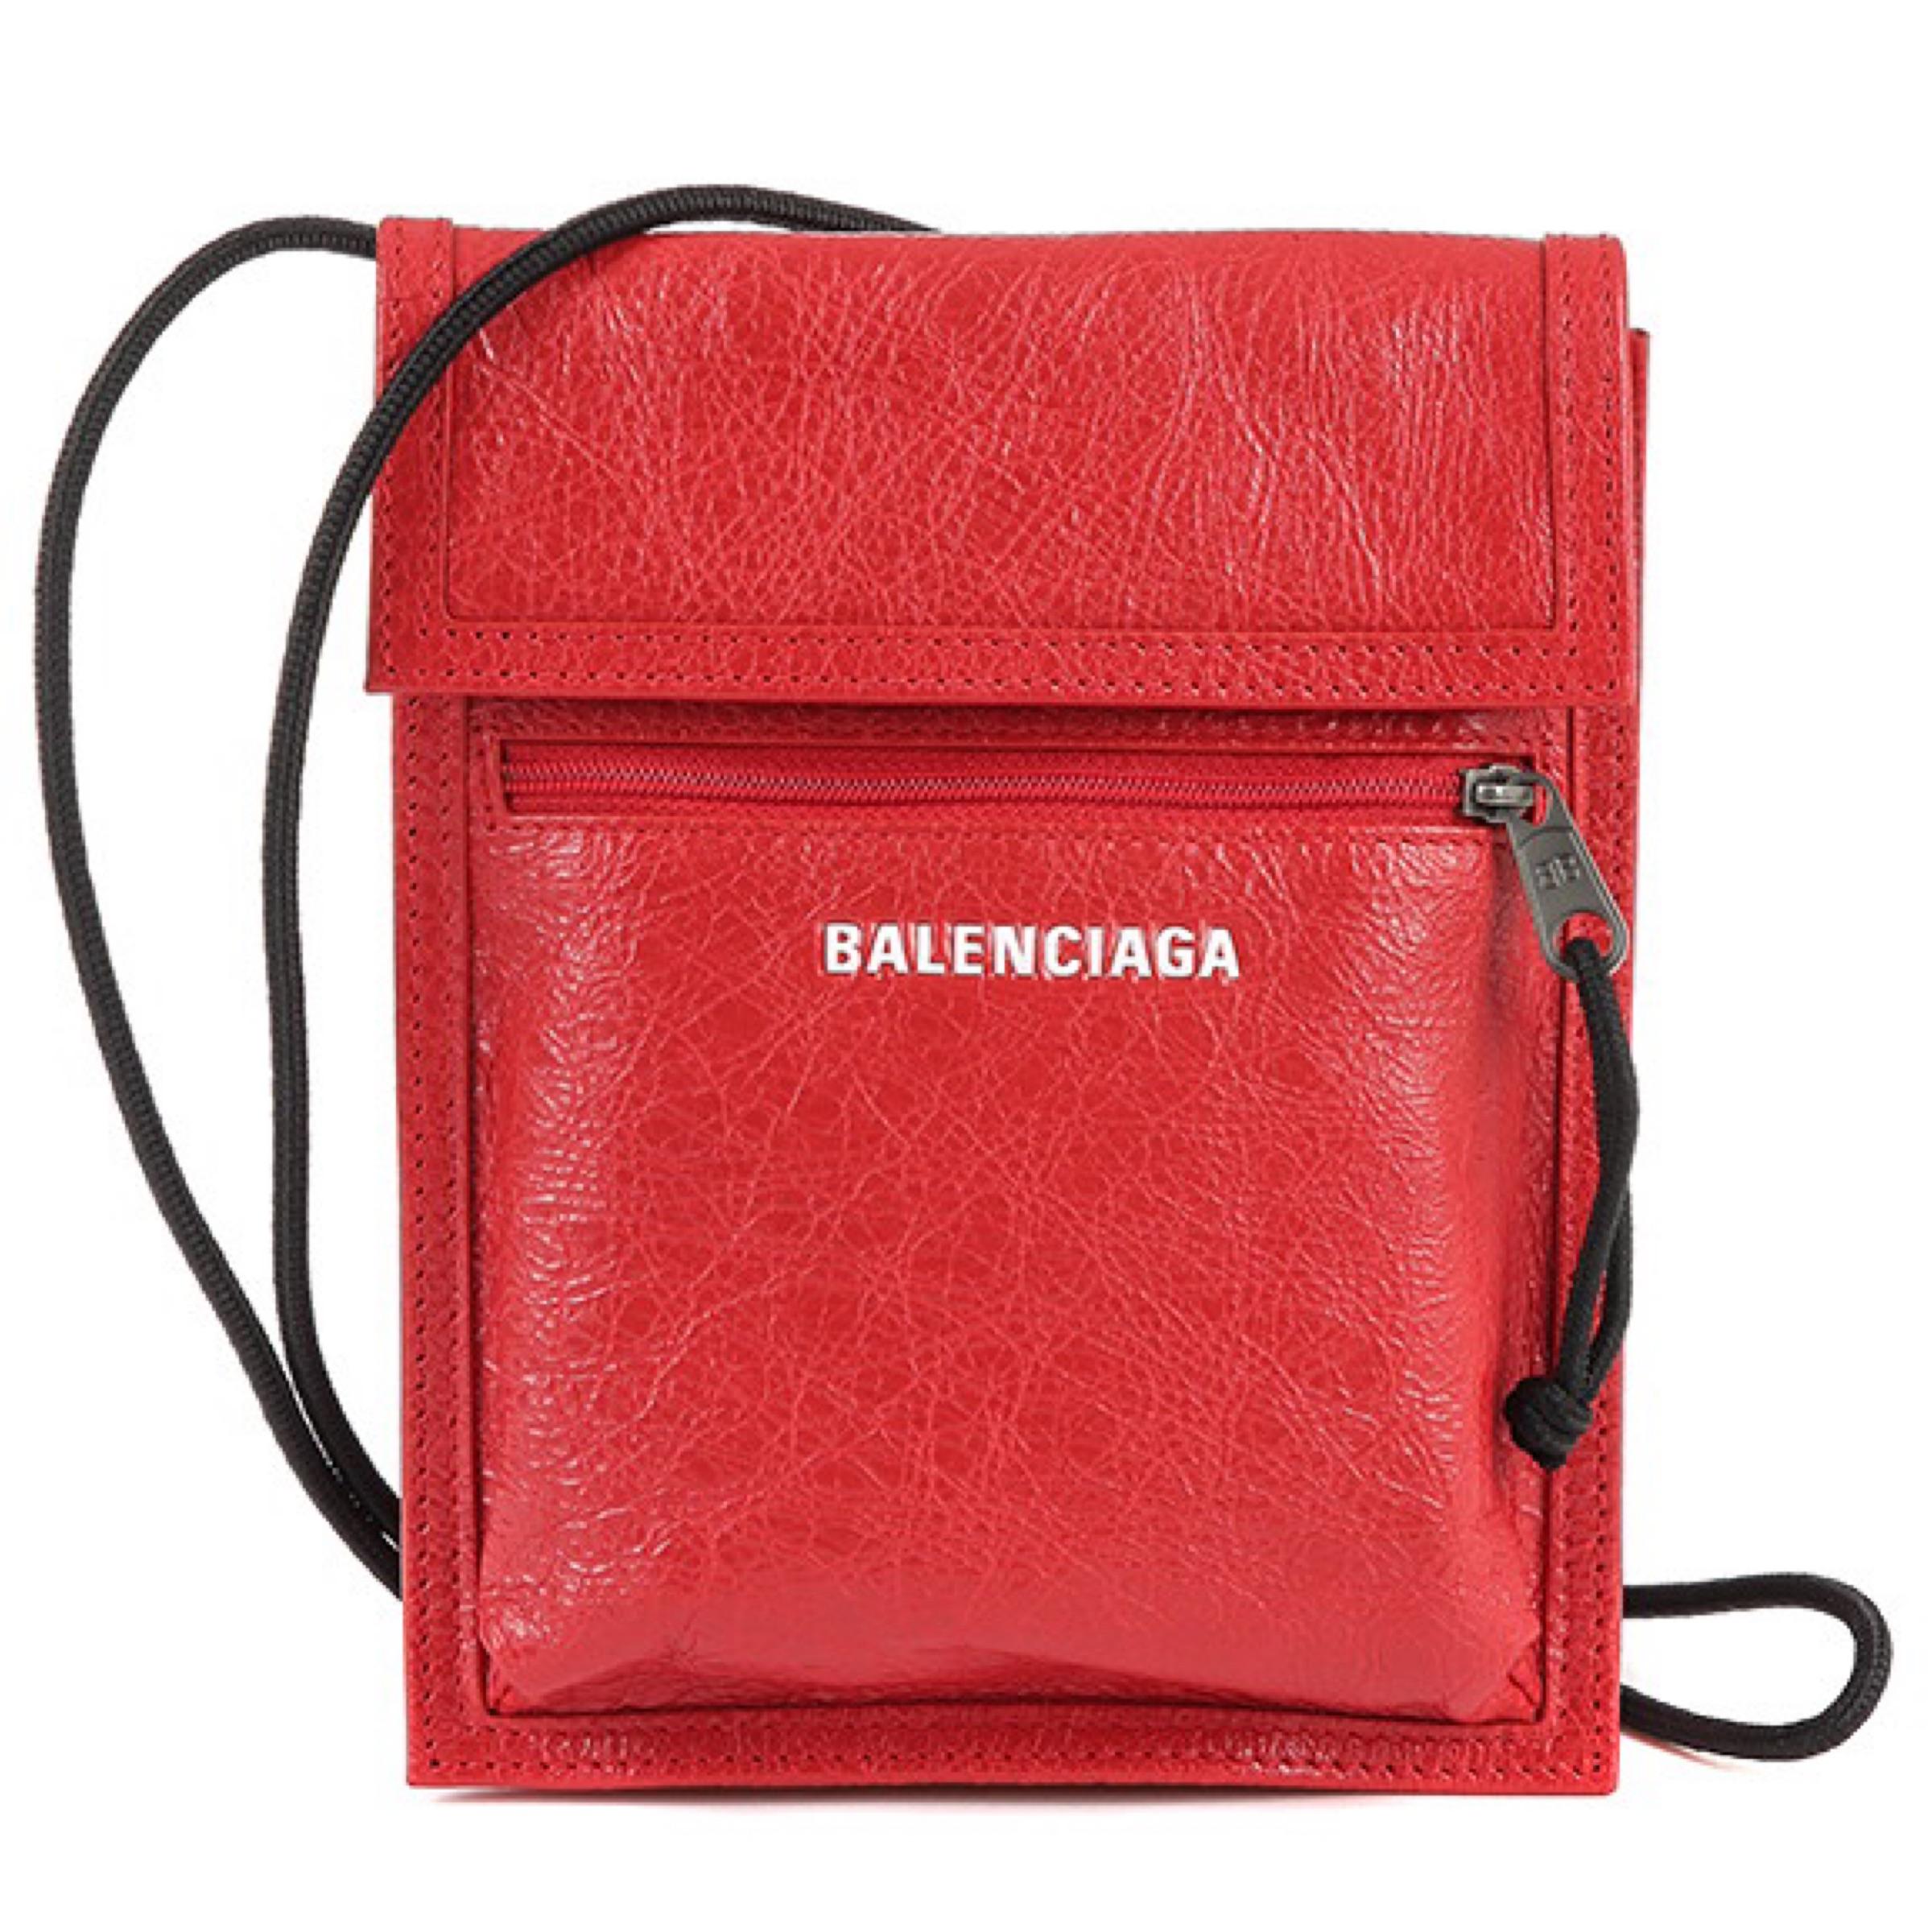 New Balenciaga Red Explorer Cracked Leather Pouch Crossbody Bag

Authenticity Guaranteed

DETAILS
Brand: Balenciaga
Condition: Brand new
Gender: Unisex
Category: Crossbody bag
Color: Red
Material: Leather
Front logo print
Flap closure
Adjustable